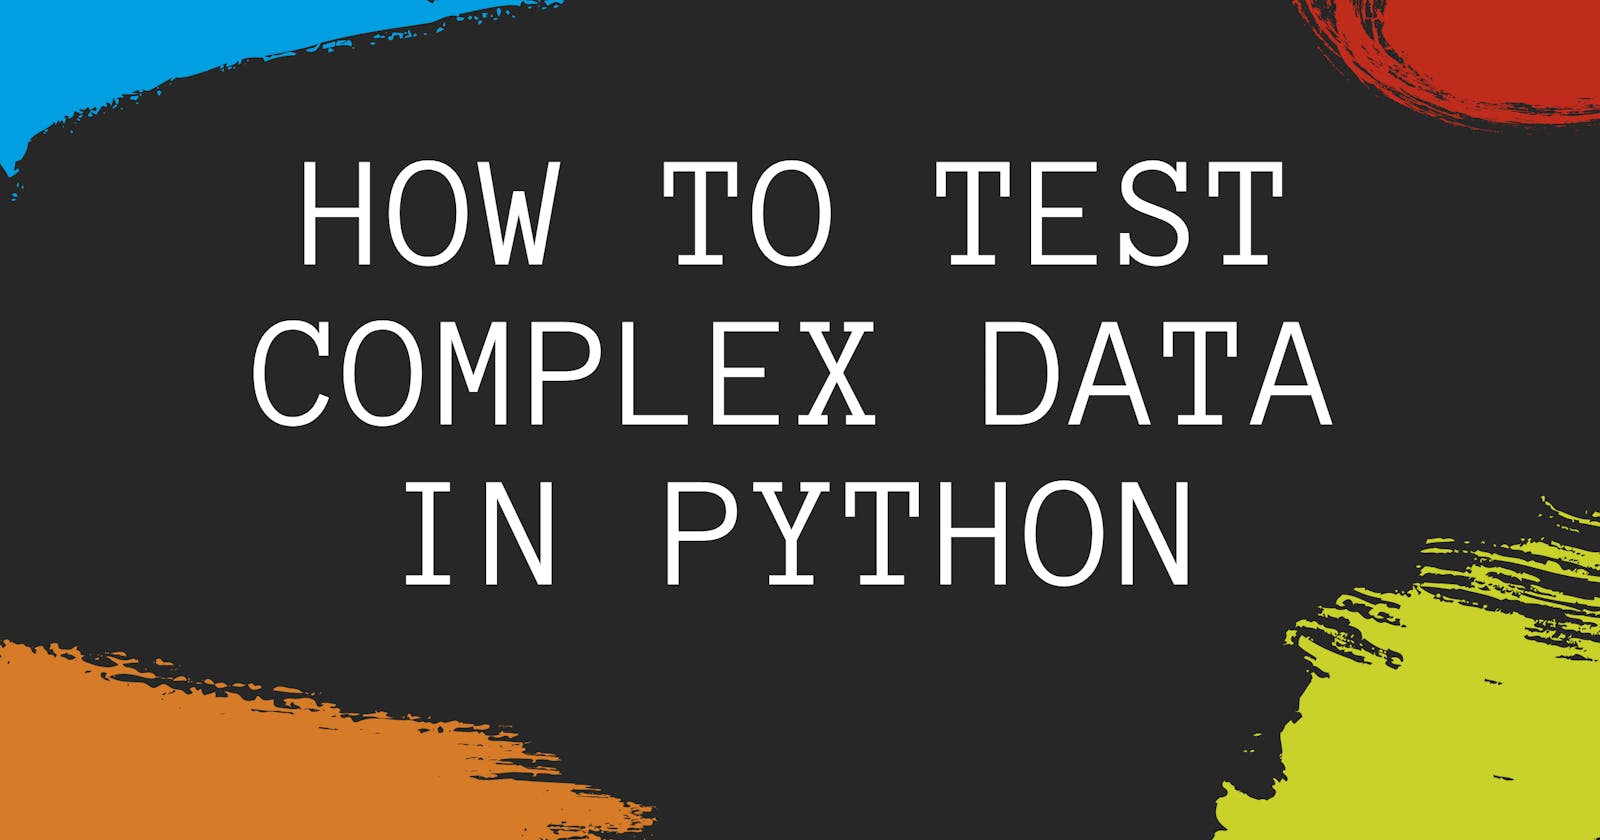 How to Unit Test Complex Data Like Numpy Arrays in Python